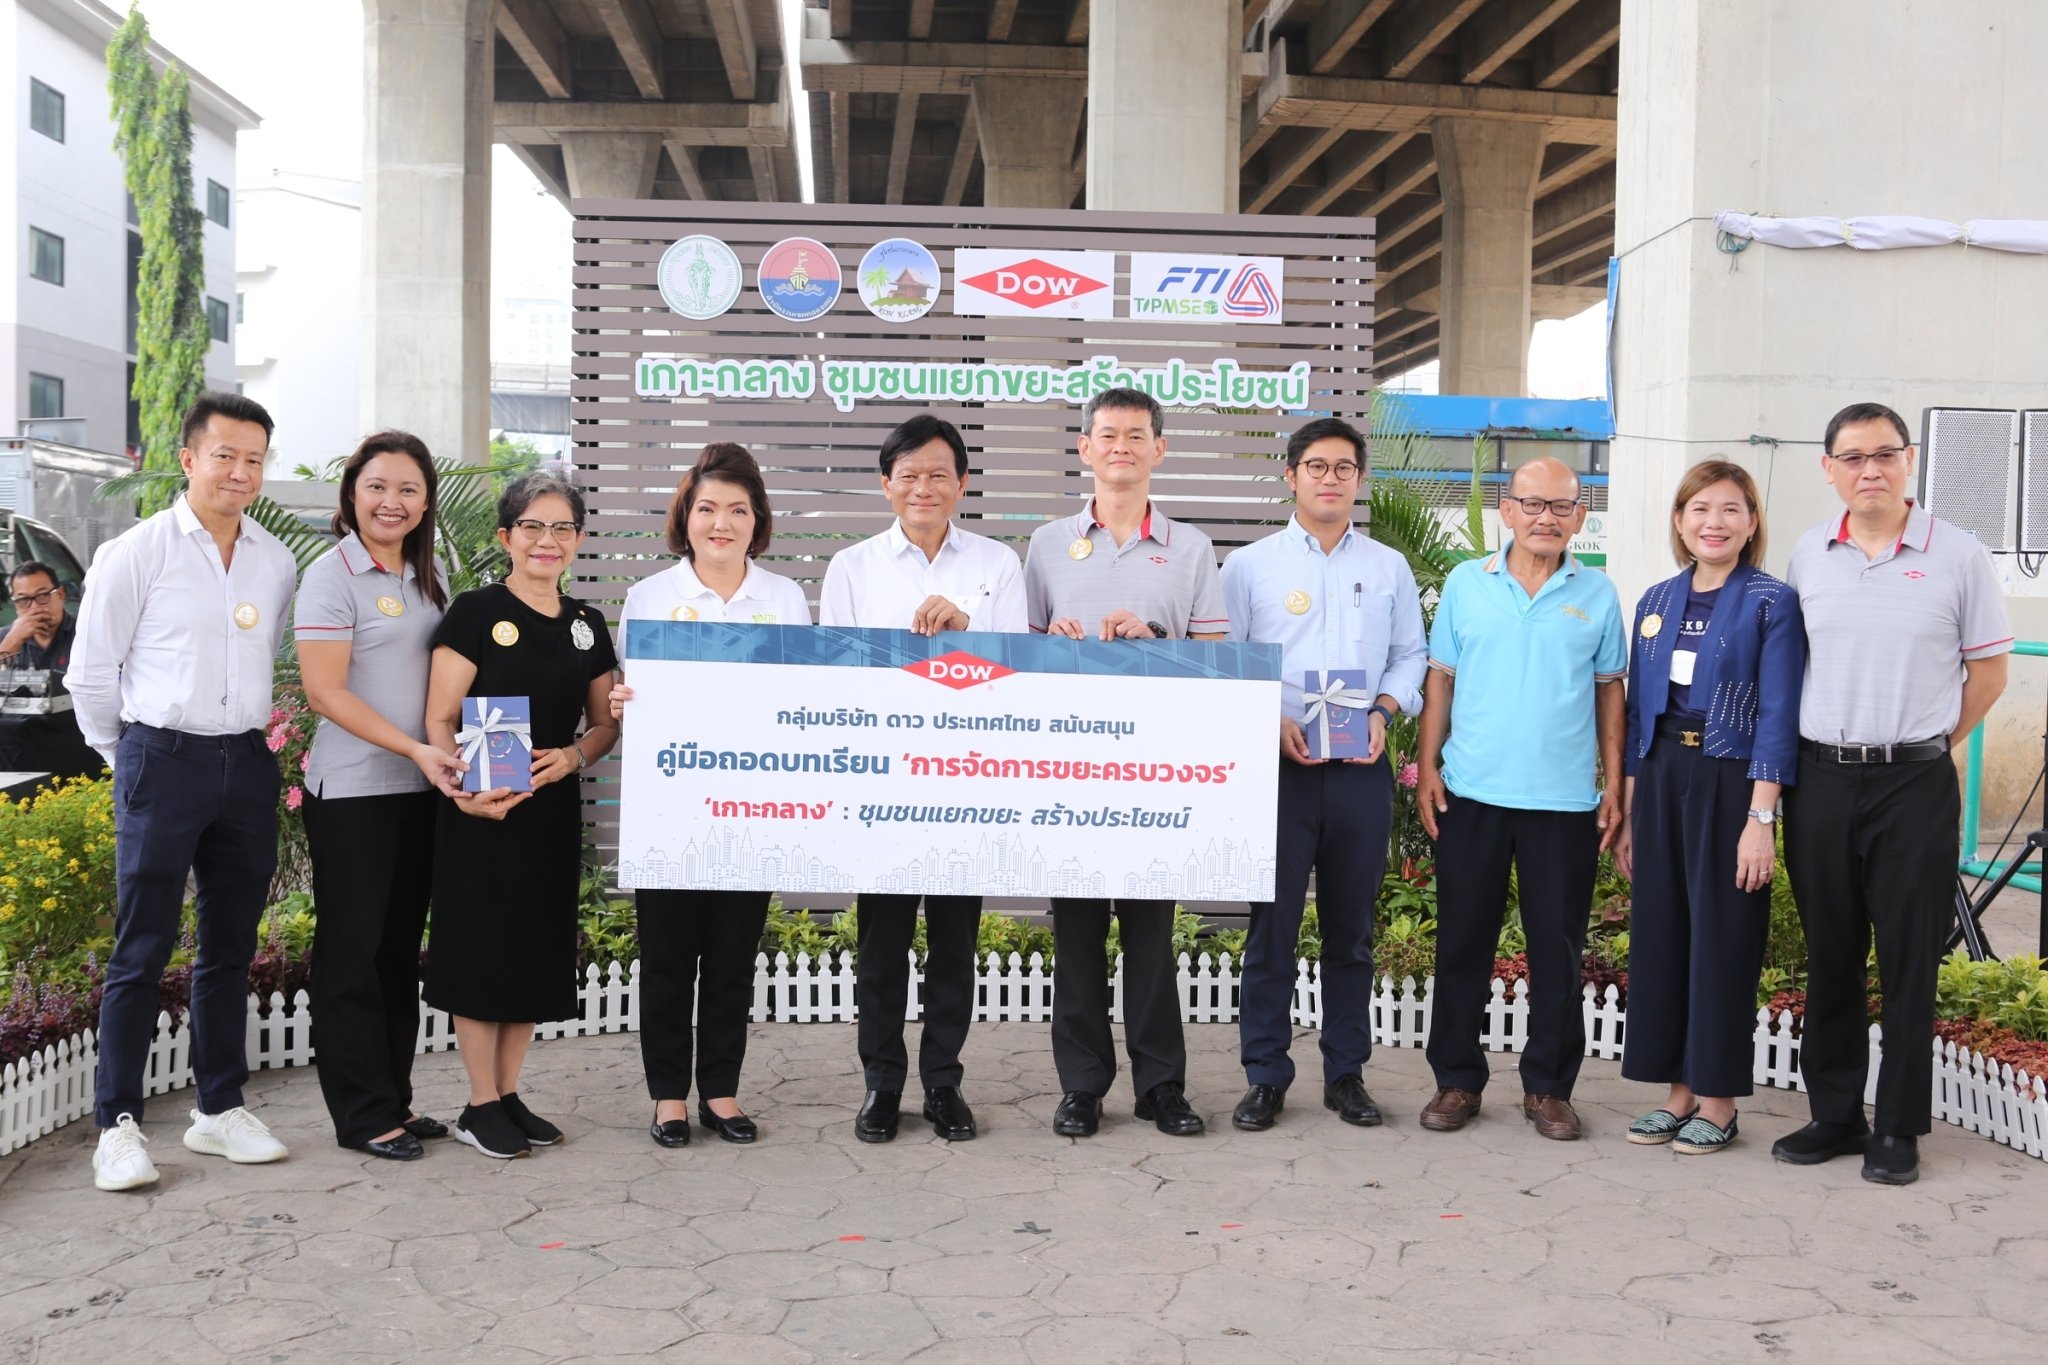 Channel 3 joined Open-house event under “Koh Klang: Community Model on Integrated Waste Management Project”